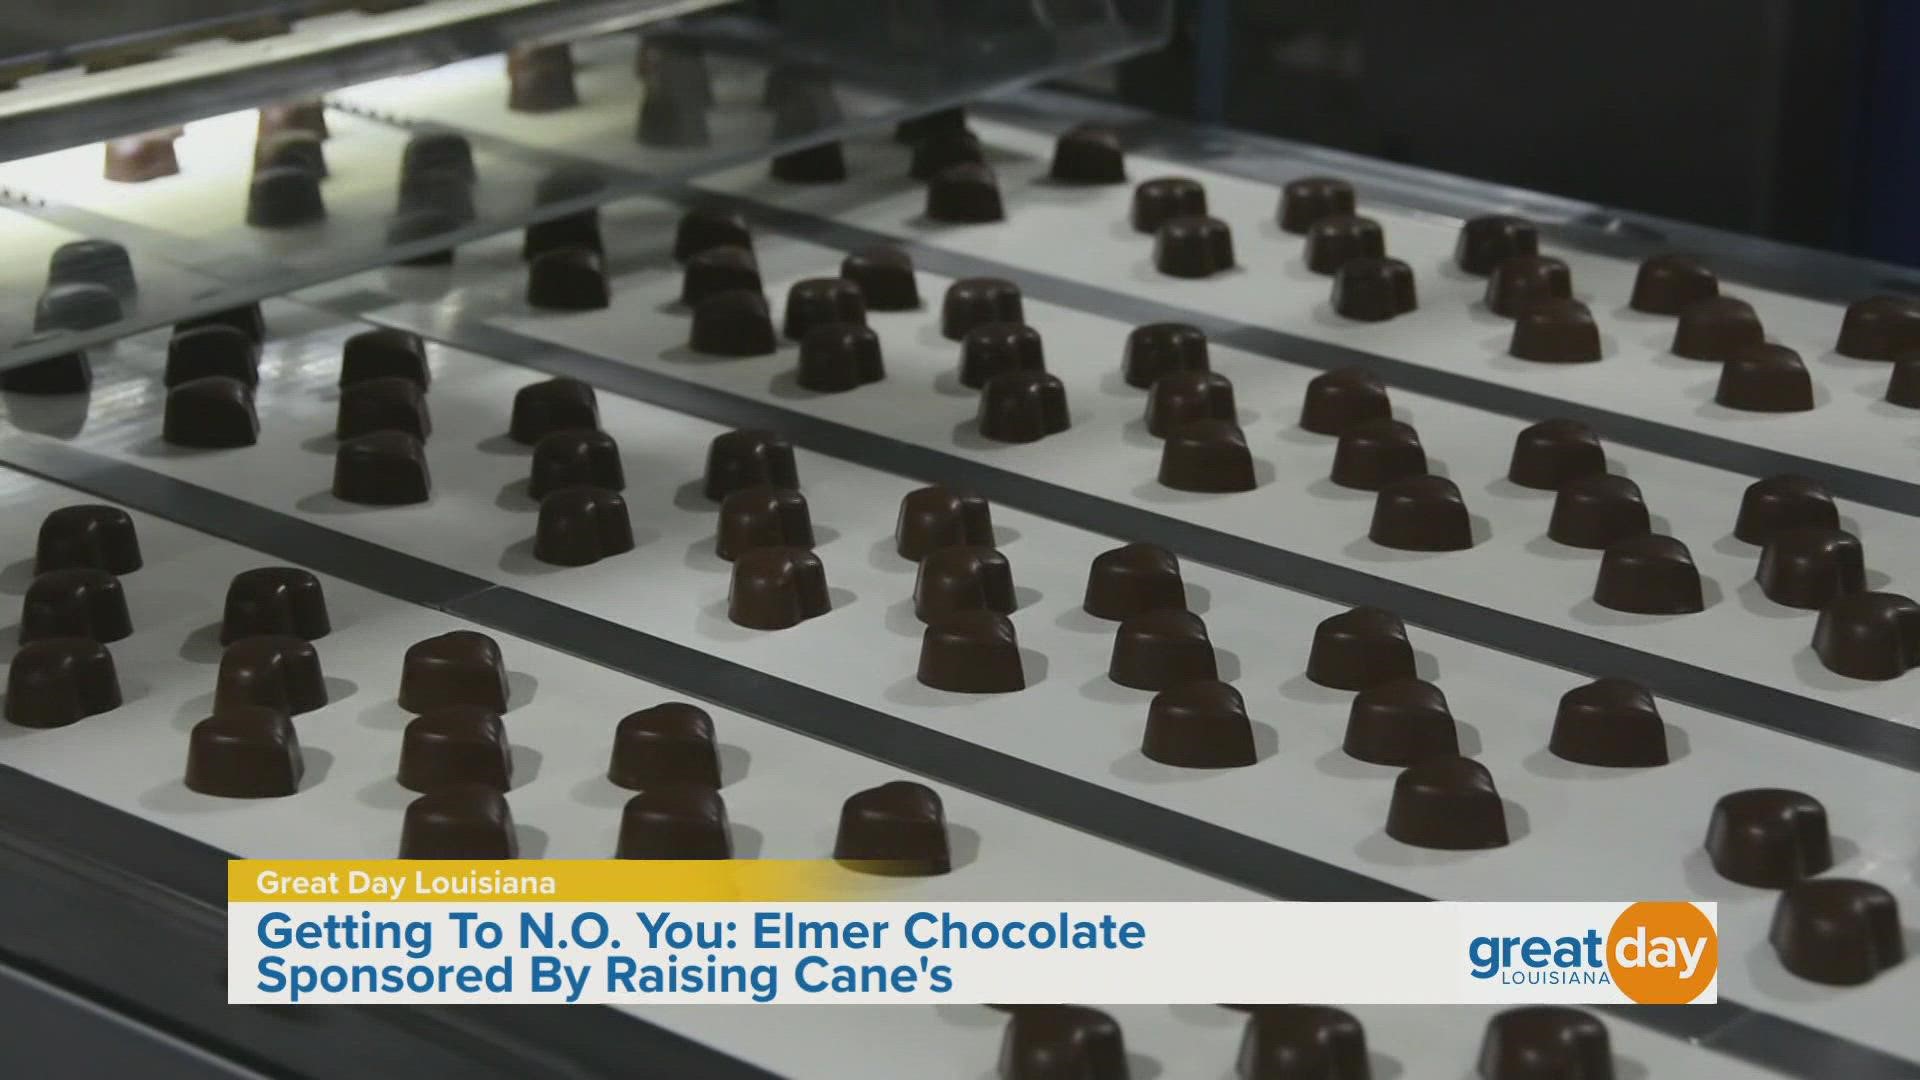 In this "Getting to N.O. You" sponsored by Raising Cane's, we visit the famous Elmer Chocolate in Ponchatoula to find out more about this local company's sweet story